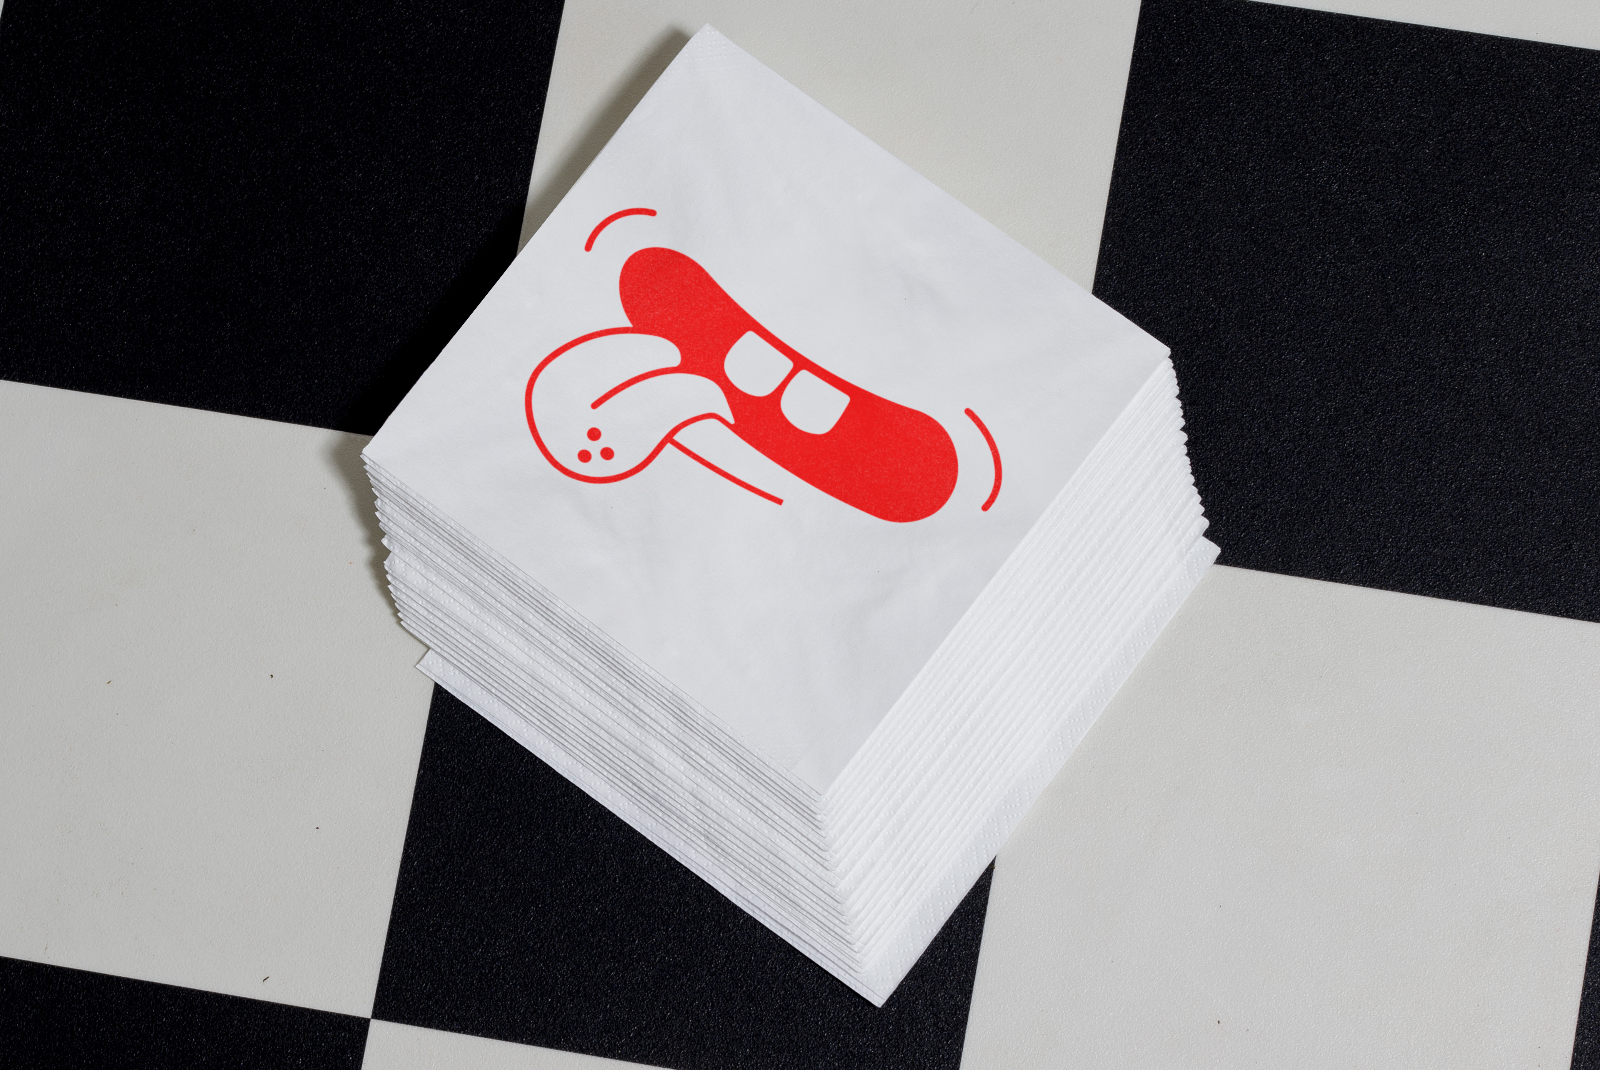 Stack of white napkins with red artistic design on geometric black and white background, ideal for mockup, design assets, napkin design display.